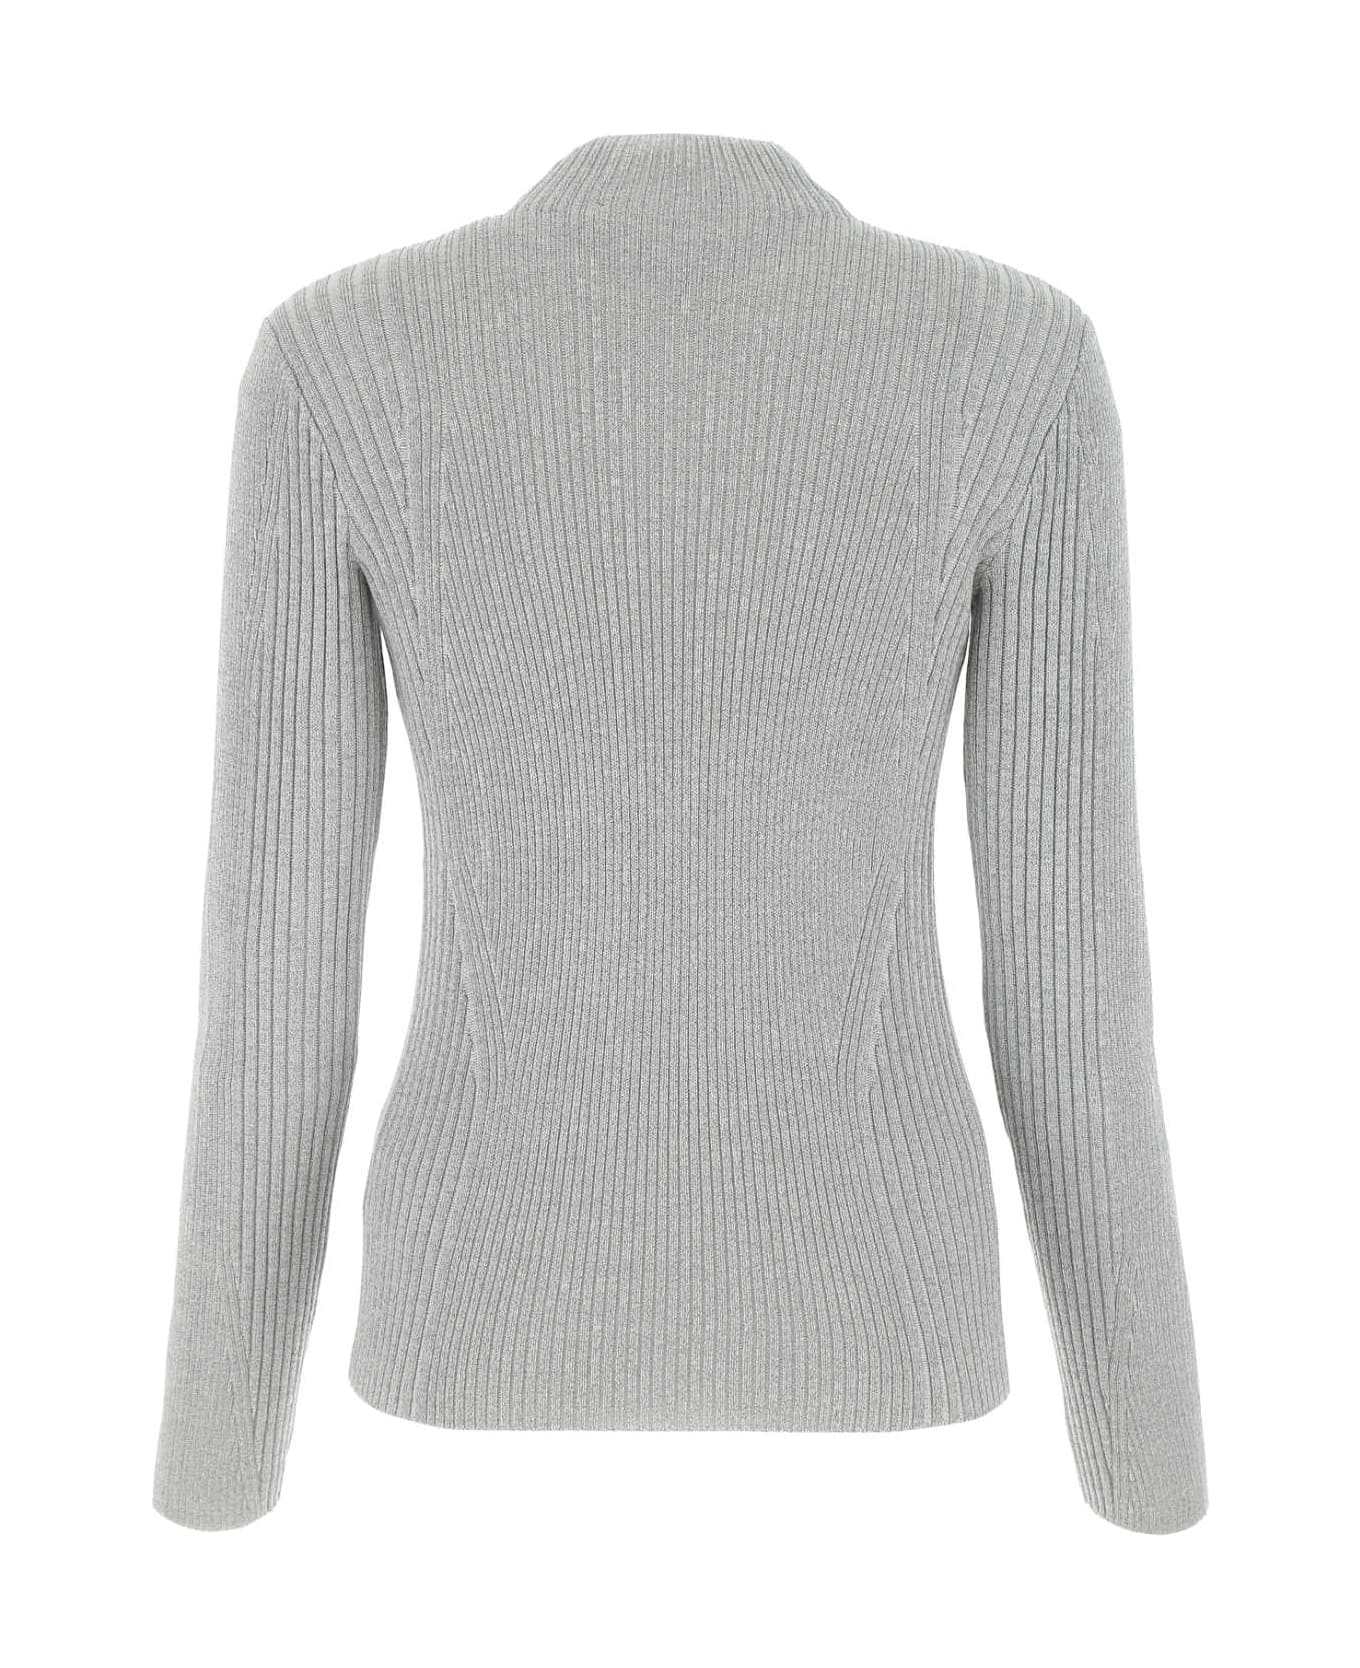 Dion Lee Light Grey Polyester Blend Sweater - SILVER